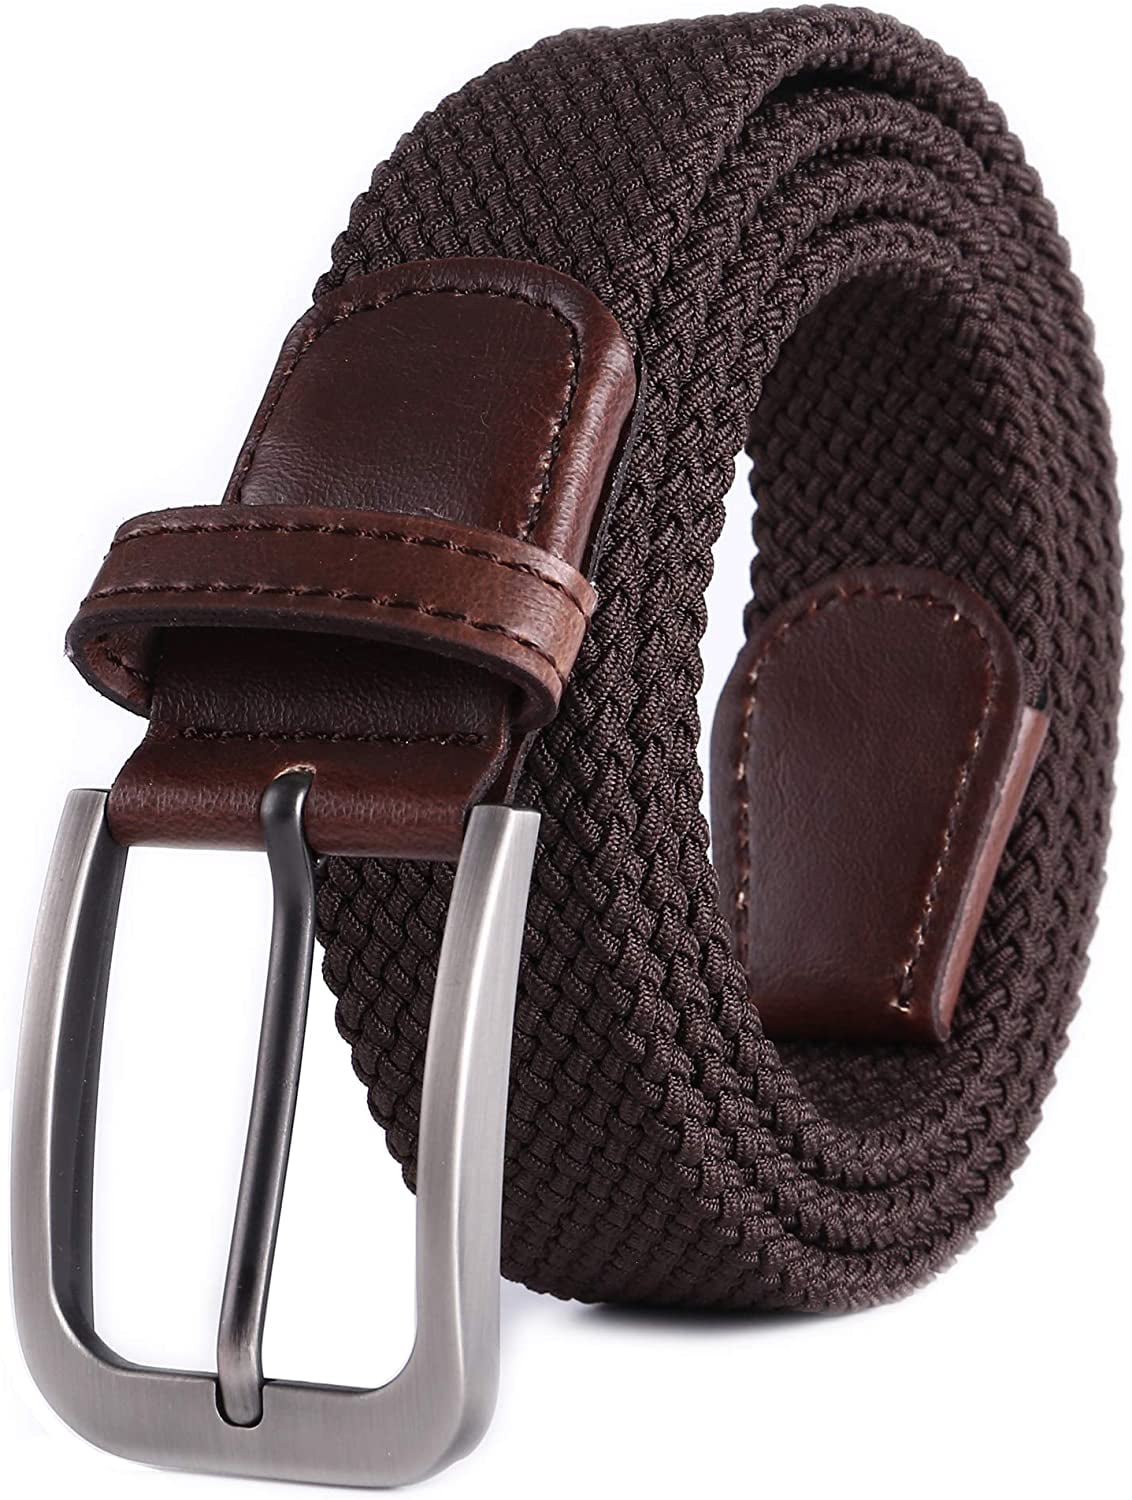 Unisex Mens Woven Stretch Braided Elastic Leather Buckle Belt Waistband Belts 